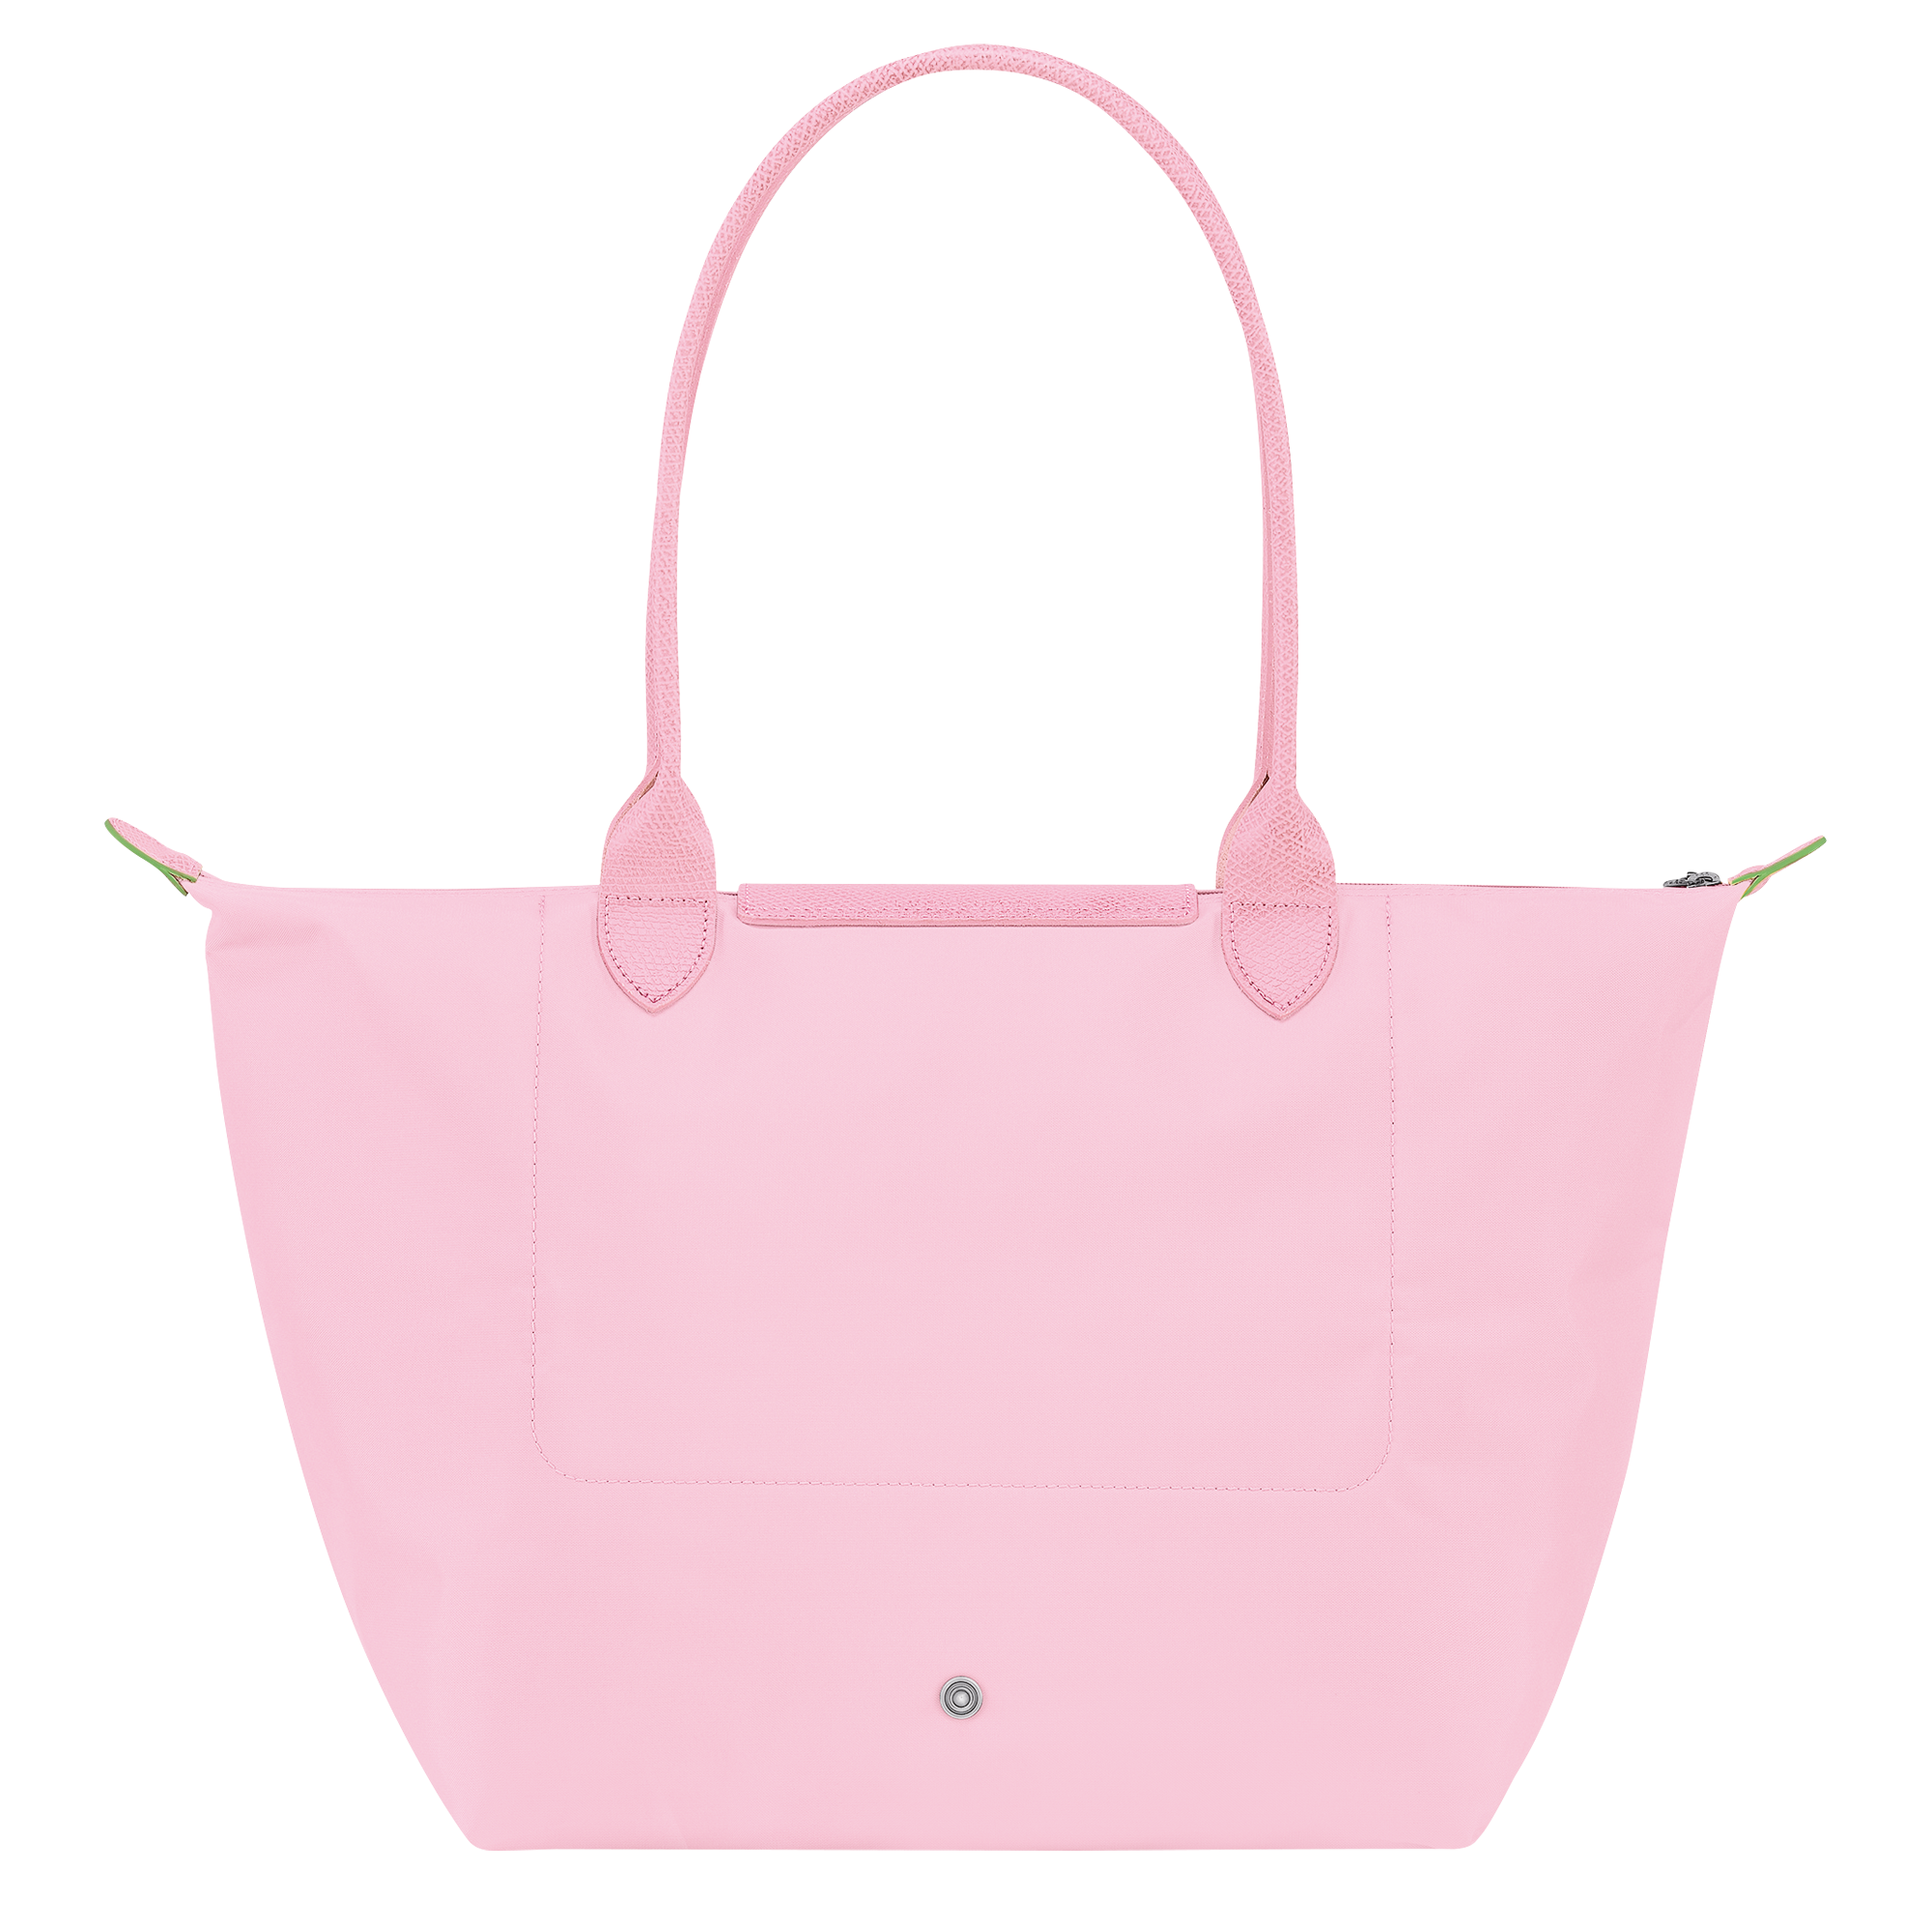 on Twitter  Bags, Girly bags, Luxury purses